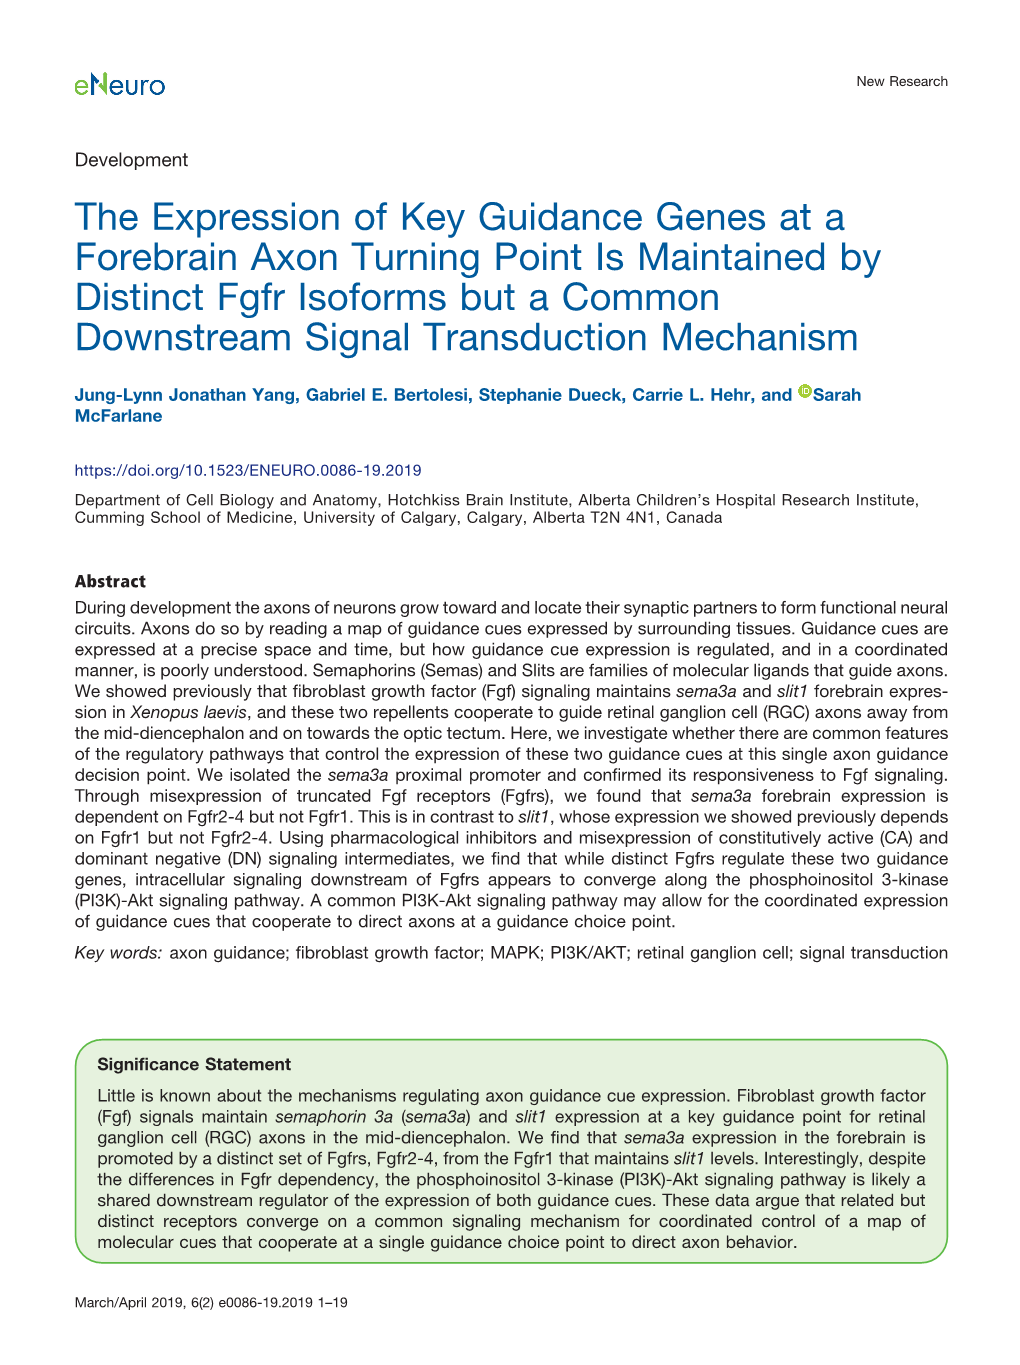 The Expression of Key Guidance Genes at a Forebrain Axon Turning Point Is Maintained by Distinct Fgfr Isoforms but a Common Downstream Signal Transduction Mechanism